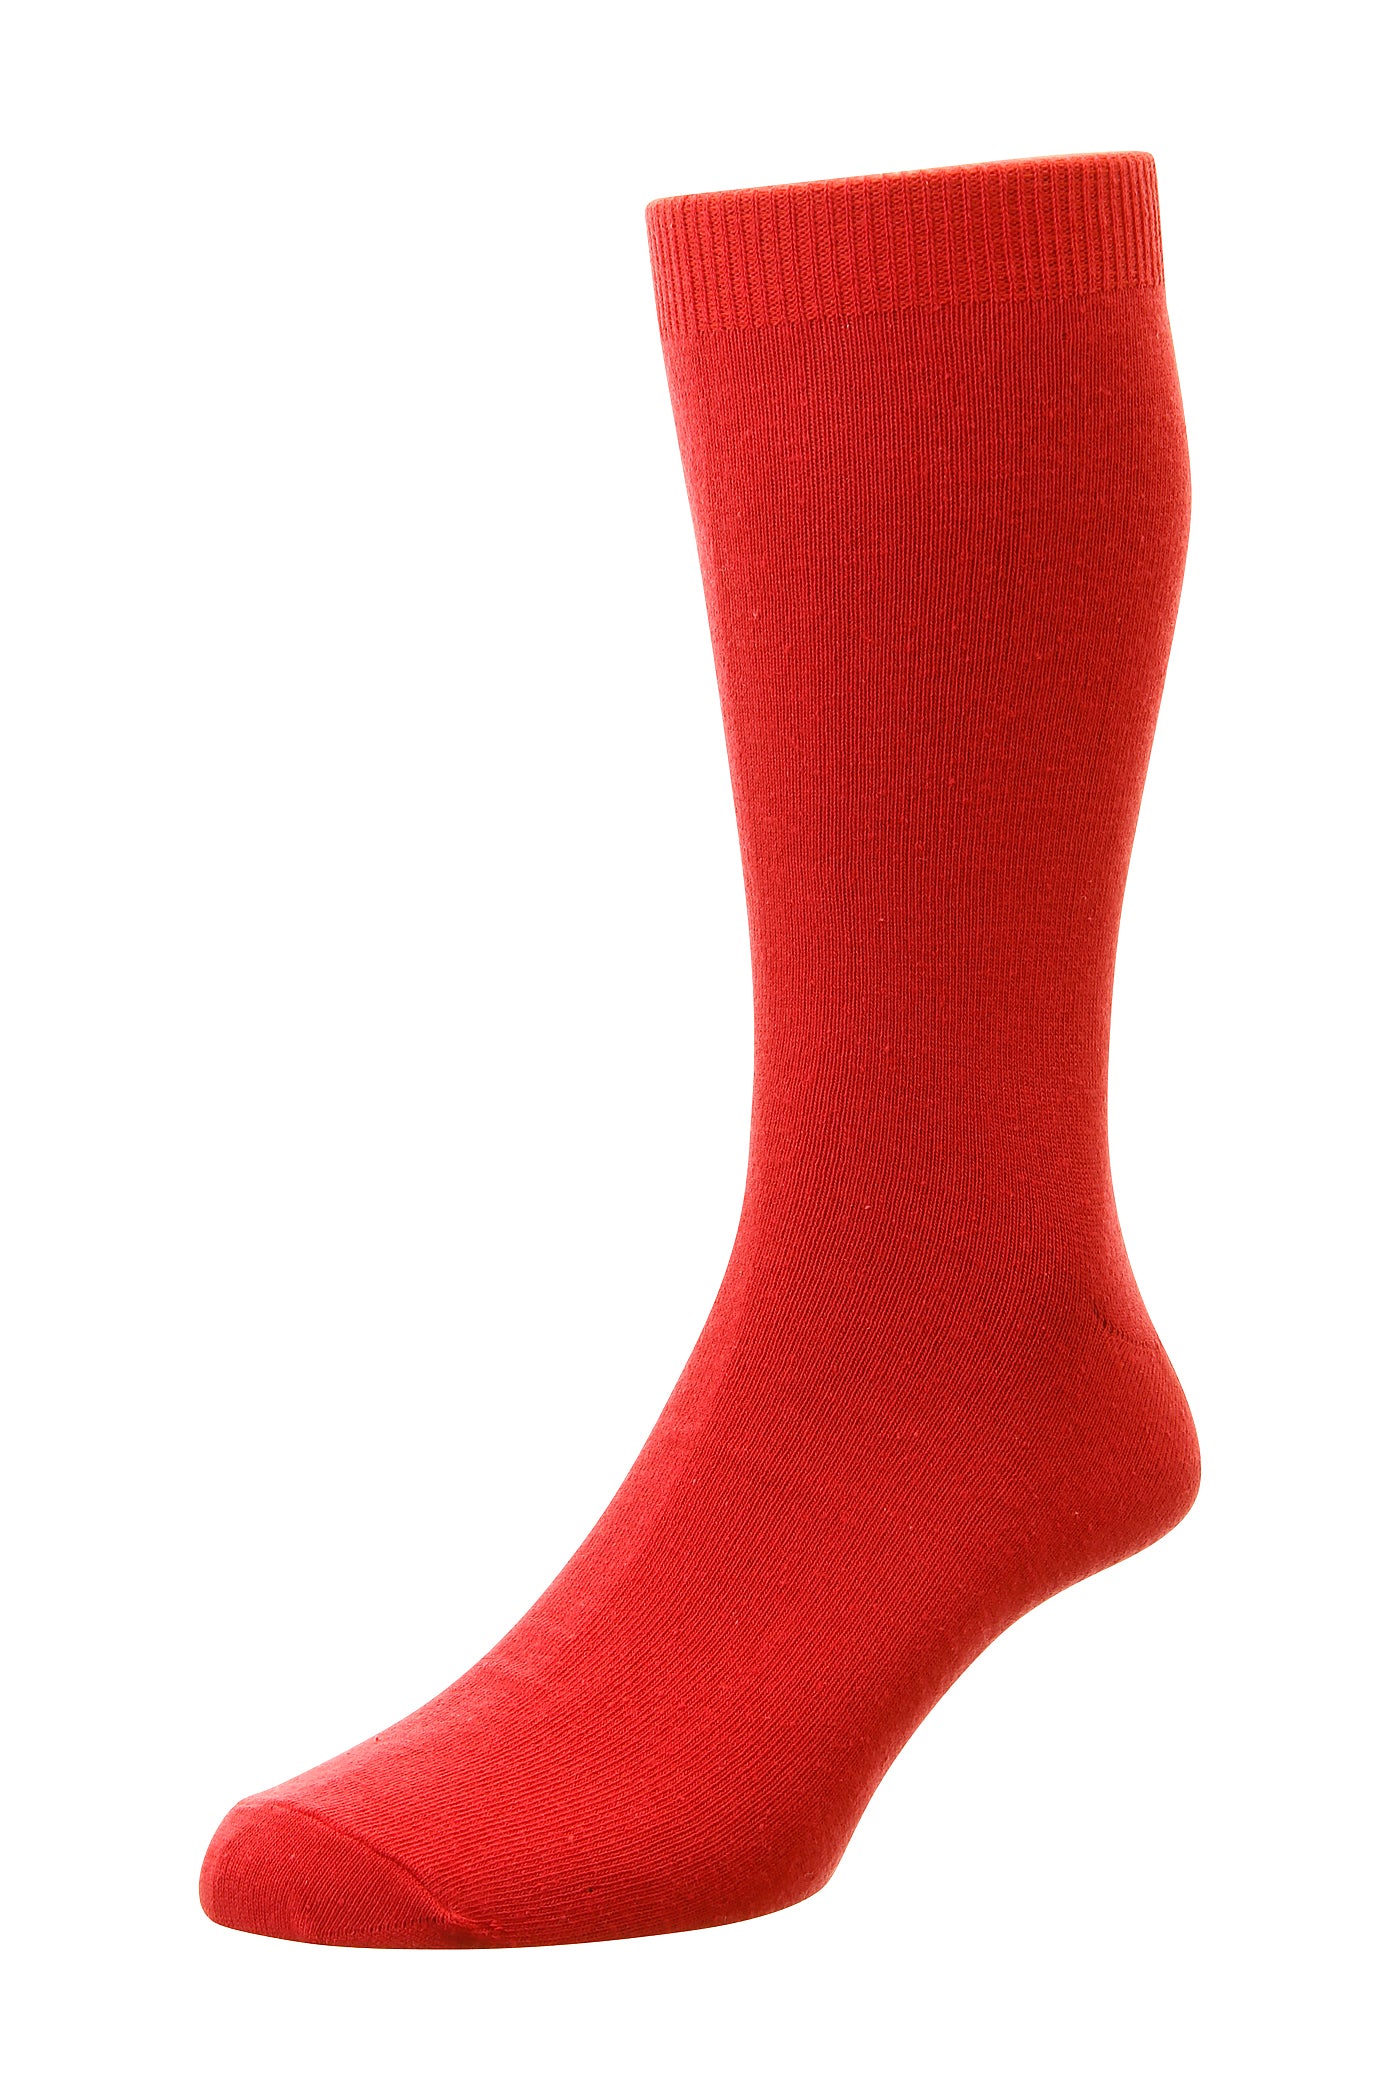 HJ Hall Classic Cotton Rich Socks Bright Red